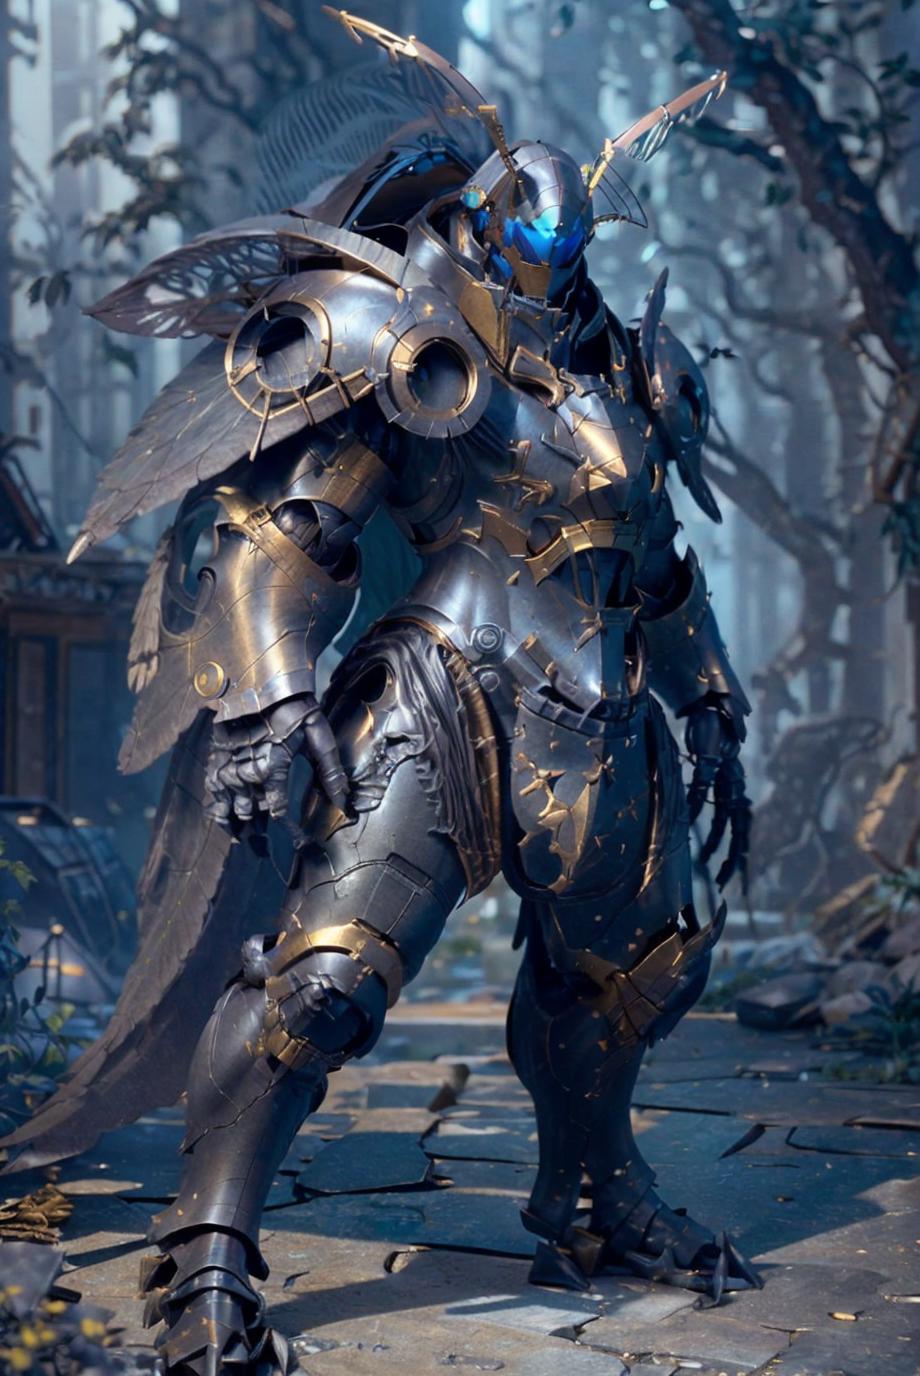 A digital art image of a robotic warrior in a fantasy world with a forest background.